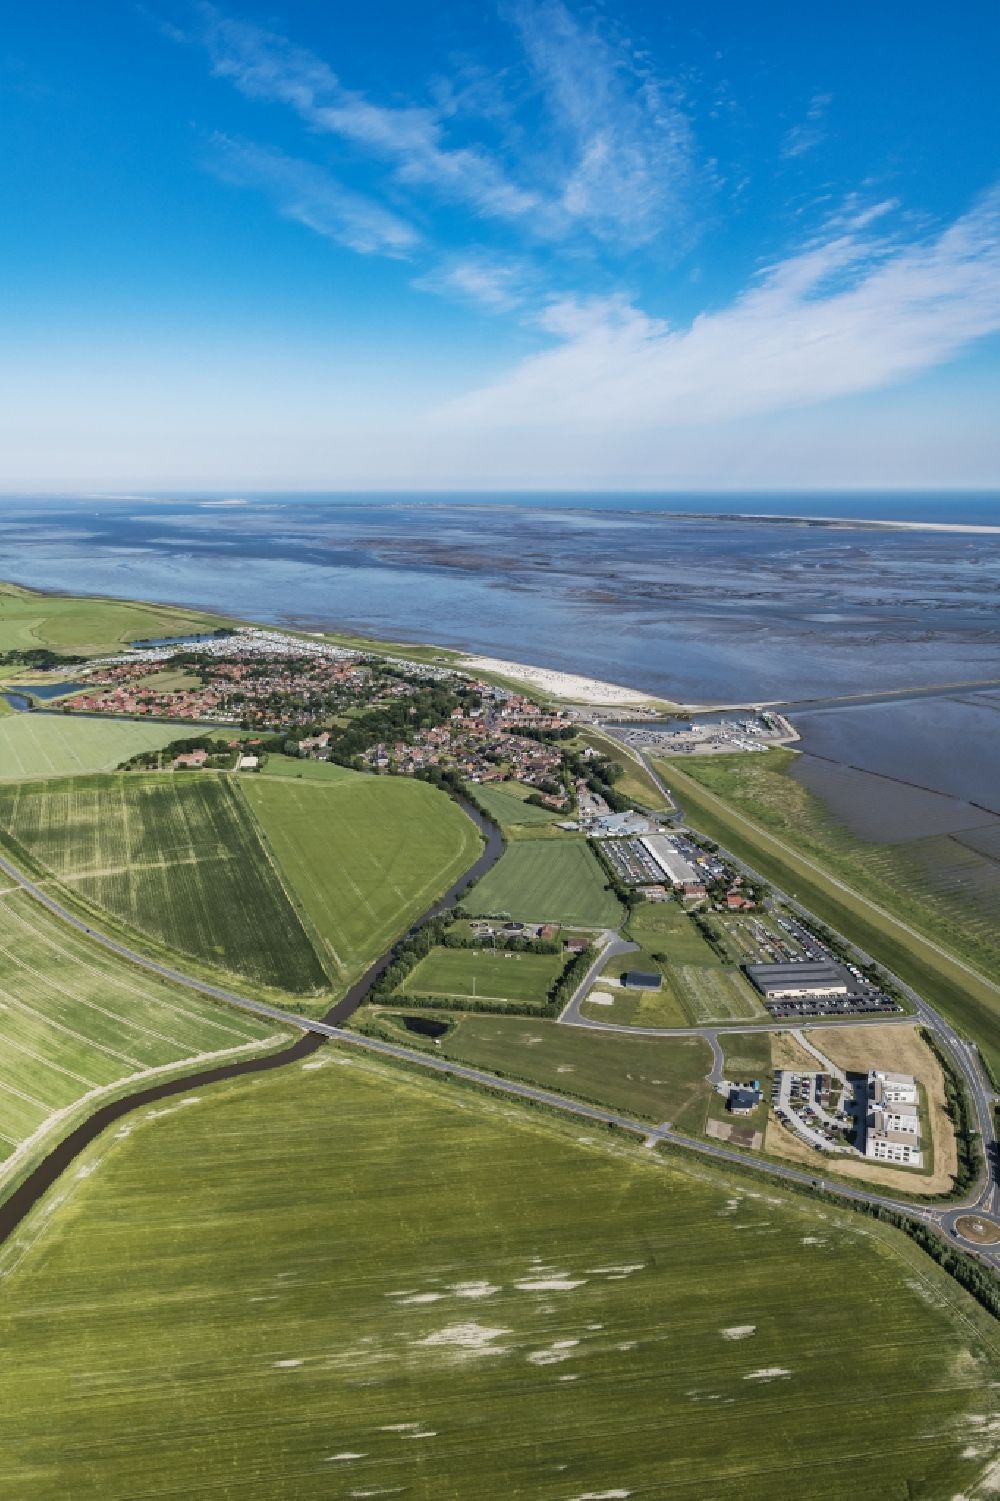 Neuharlingersiel from the bird's eye view: East Frisian Coast in Neuharlingersiel in the state of Lower Saxony. The borough of Neuharlingersiel is located in Harlinger Land in East Frisia on the North Sea shore. The coastal line consists of the Lower Saxony Wadden Sea which has been named a UNESCO world heritage site in 2009. The landscape is characterised by Wadden Sea, agriculture and fields